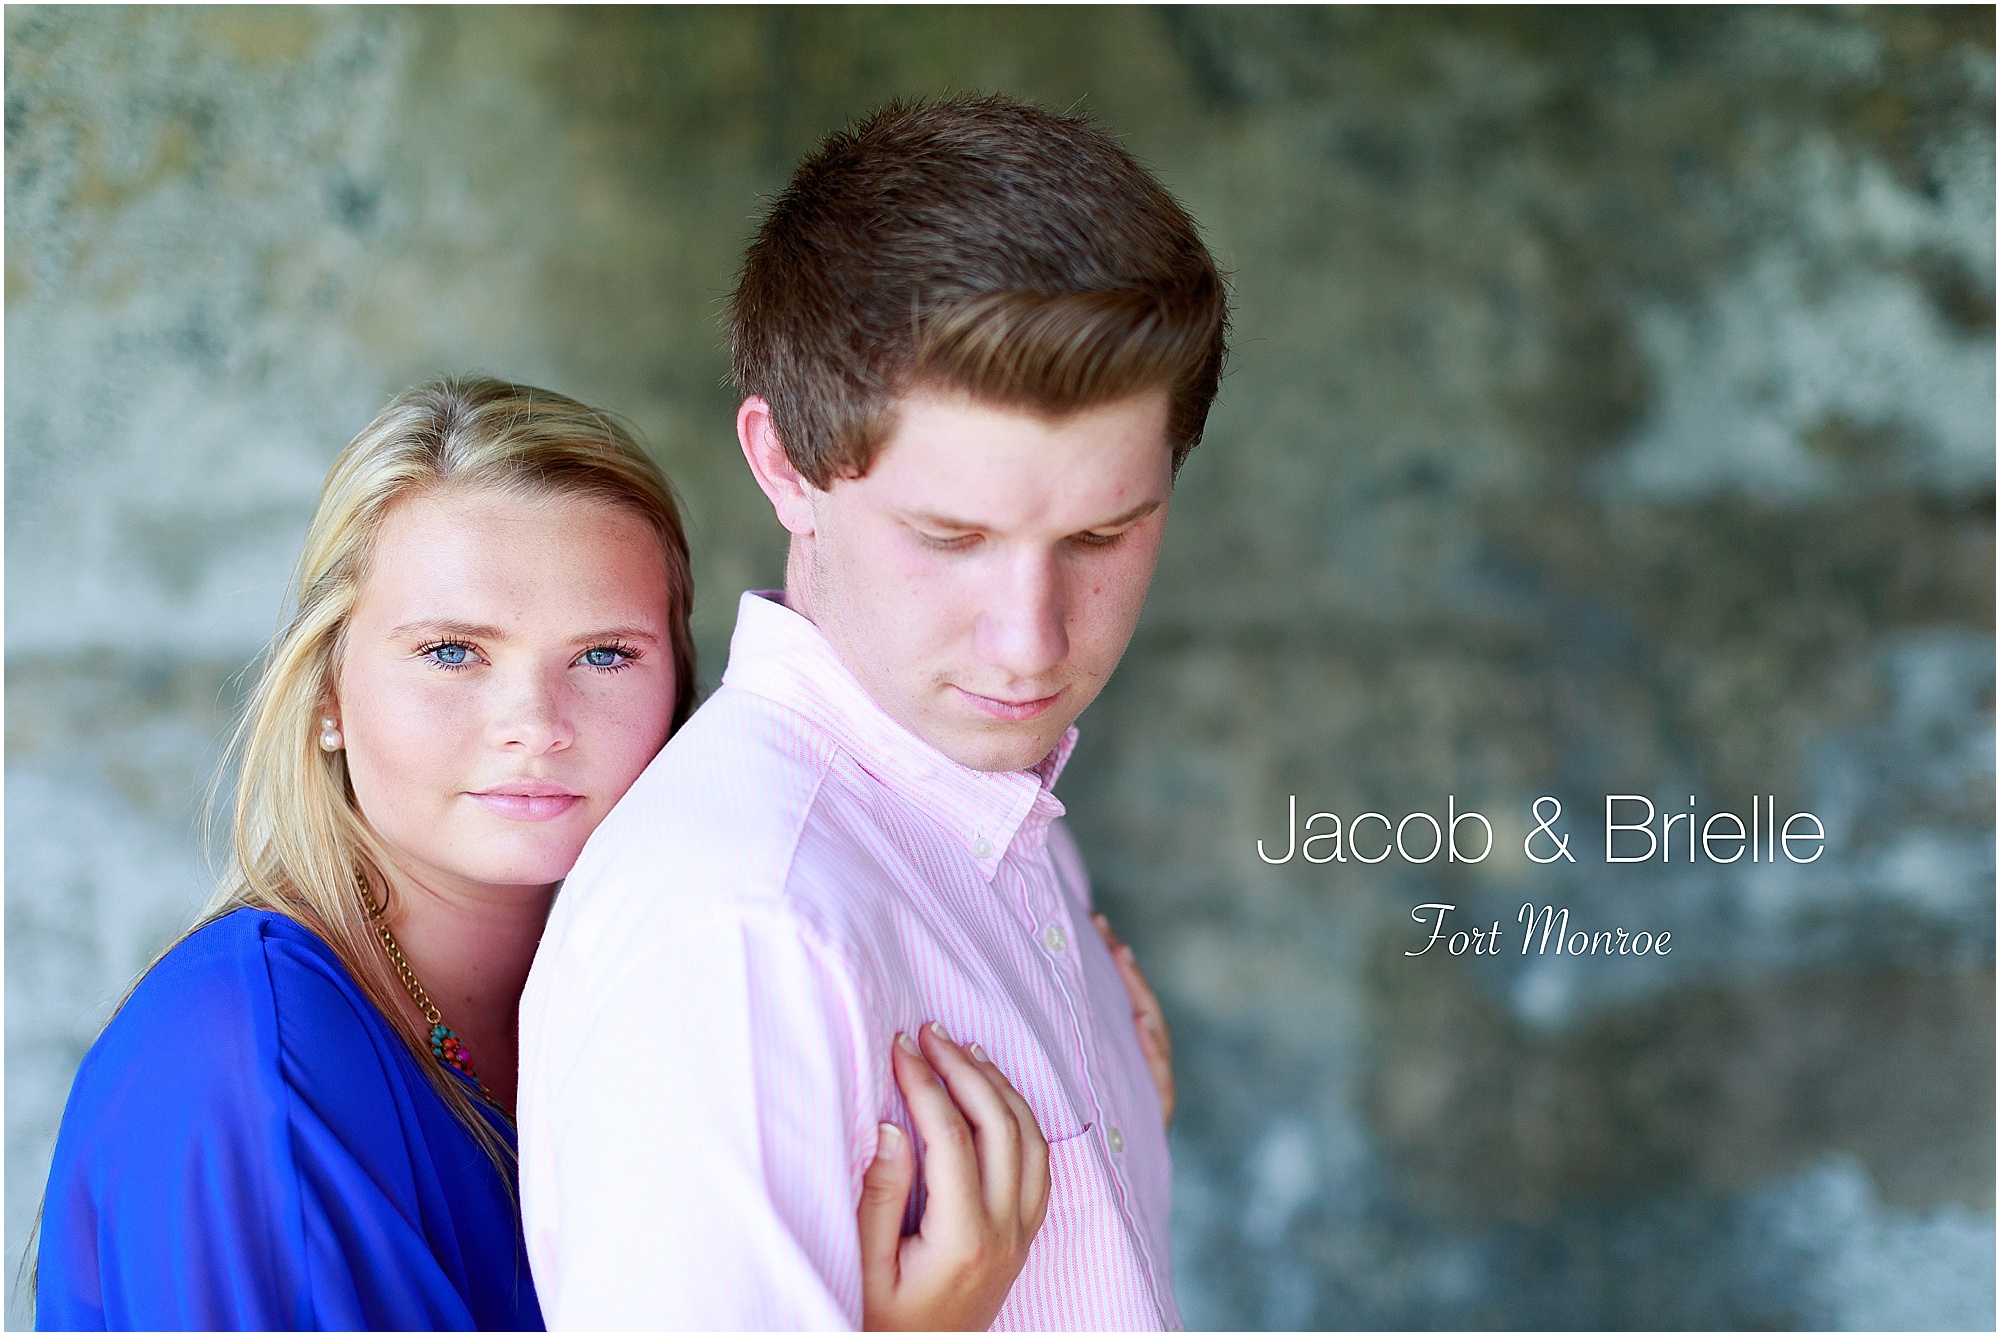 Fort Monroe Couples Session